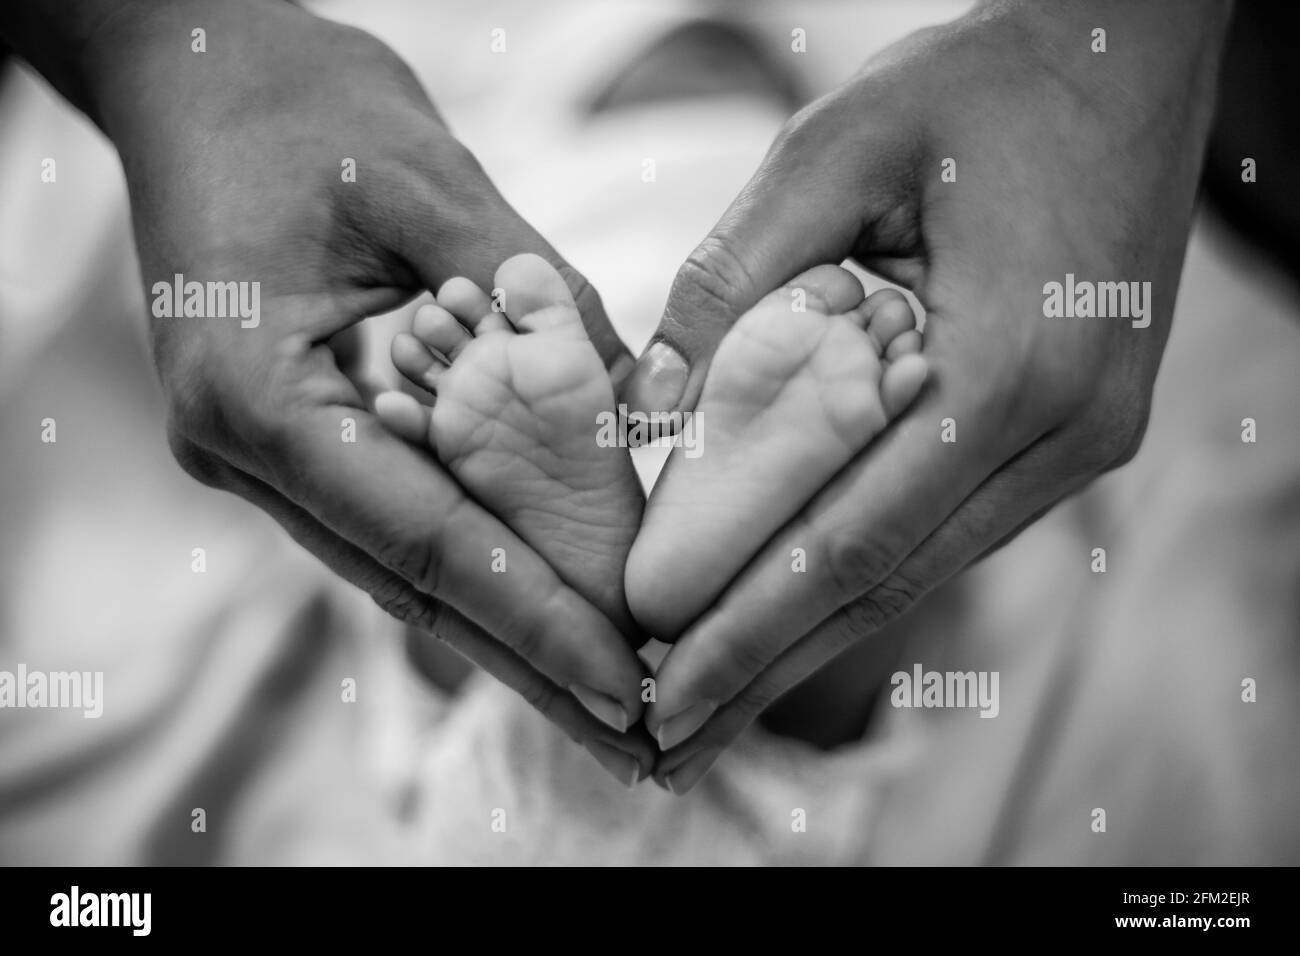 Newborn baby feet in its mother's hands shaped like a heart. Mother showing her love and affection. Black and white Stock Photo